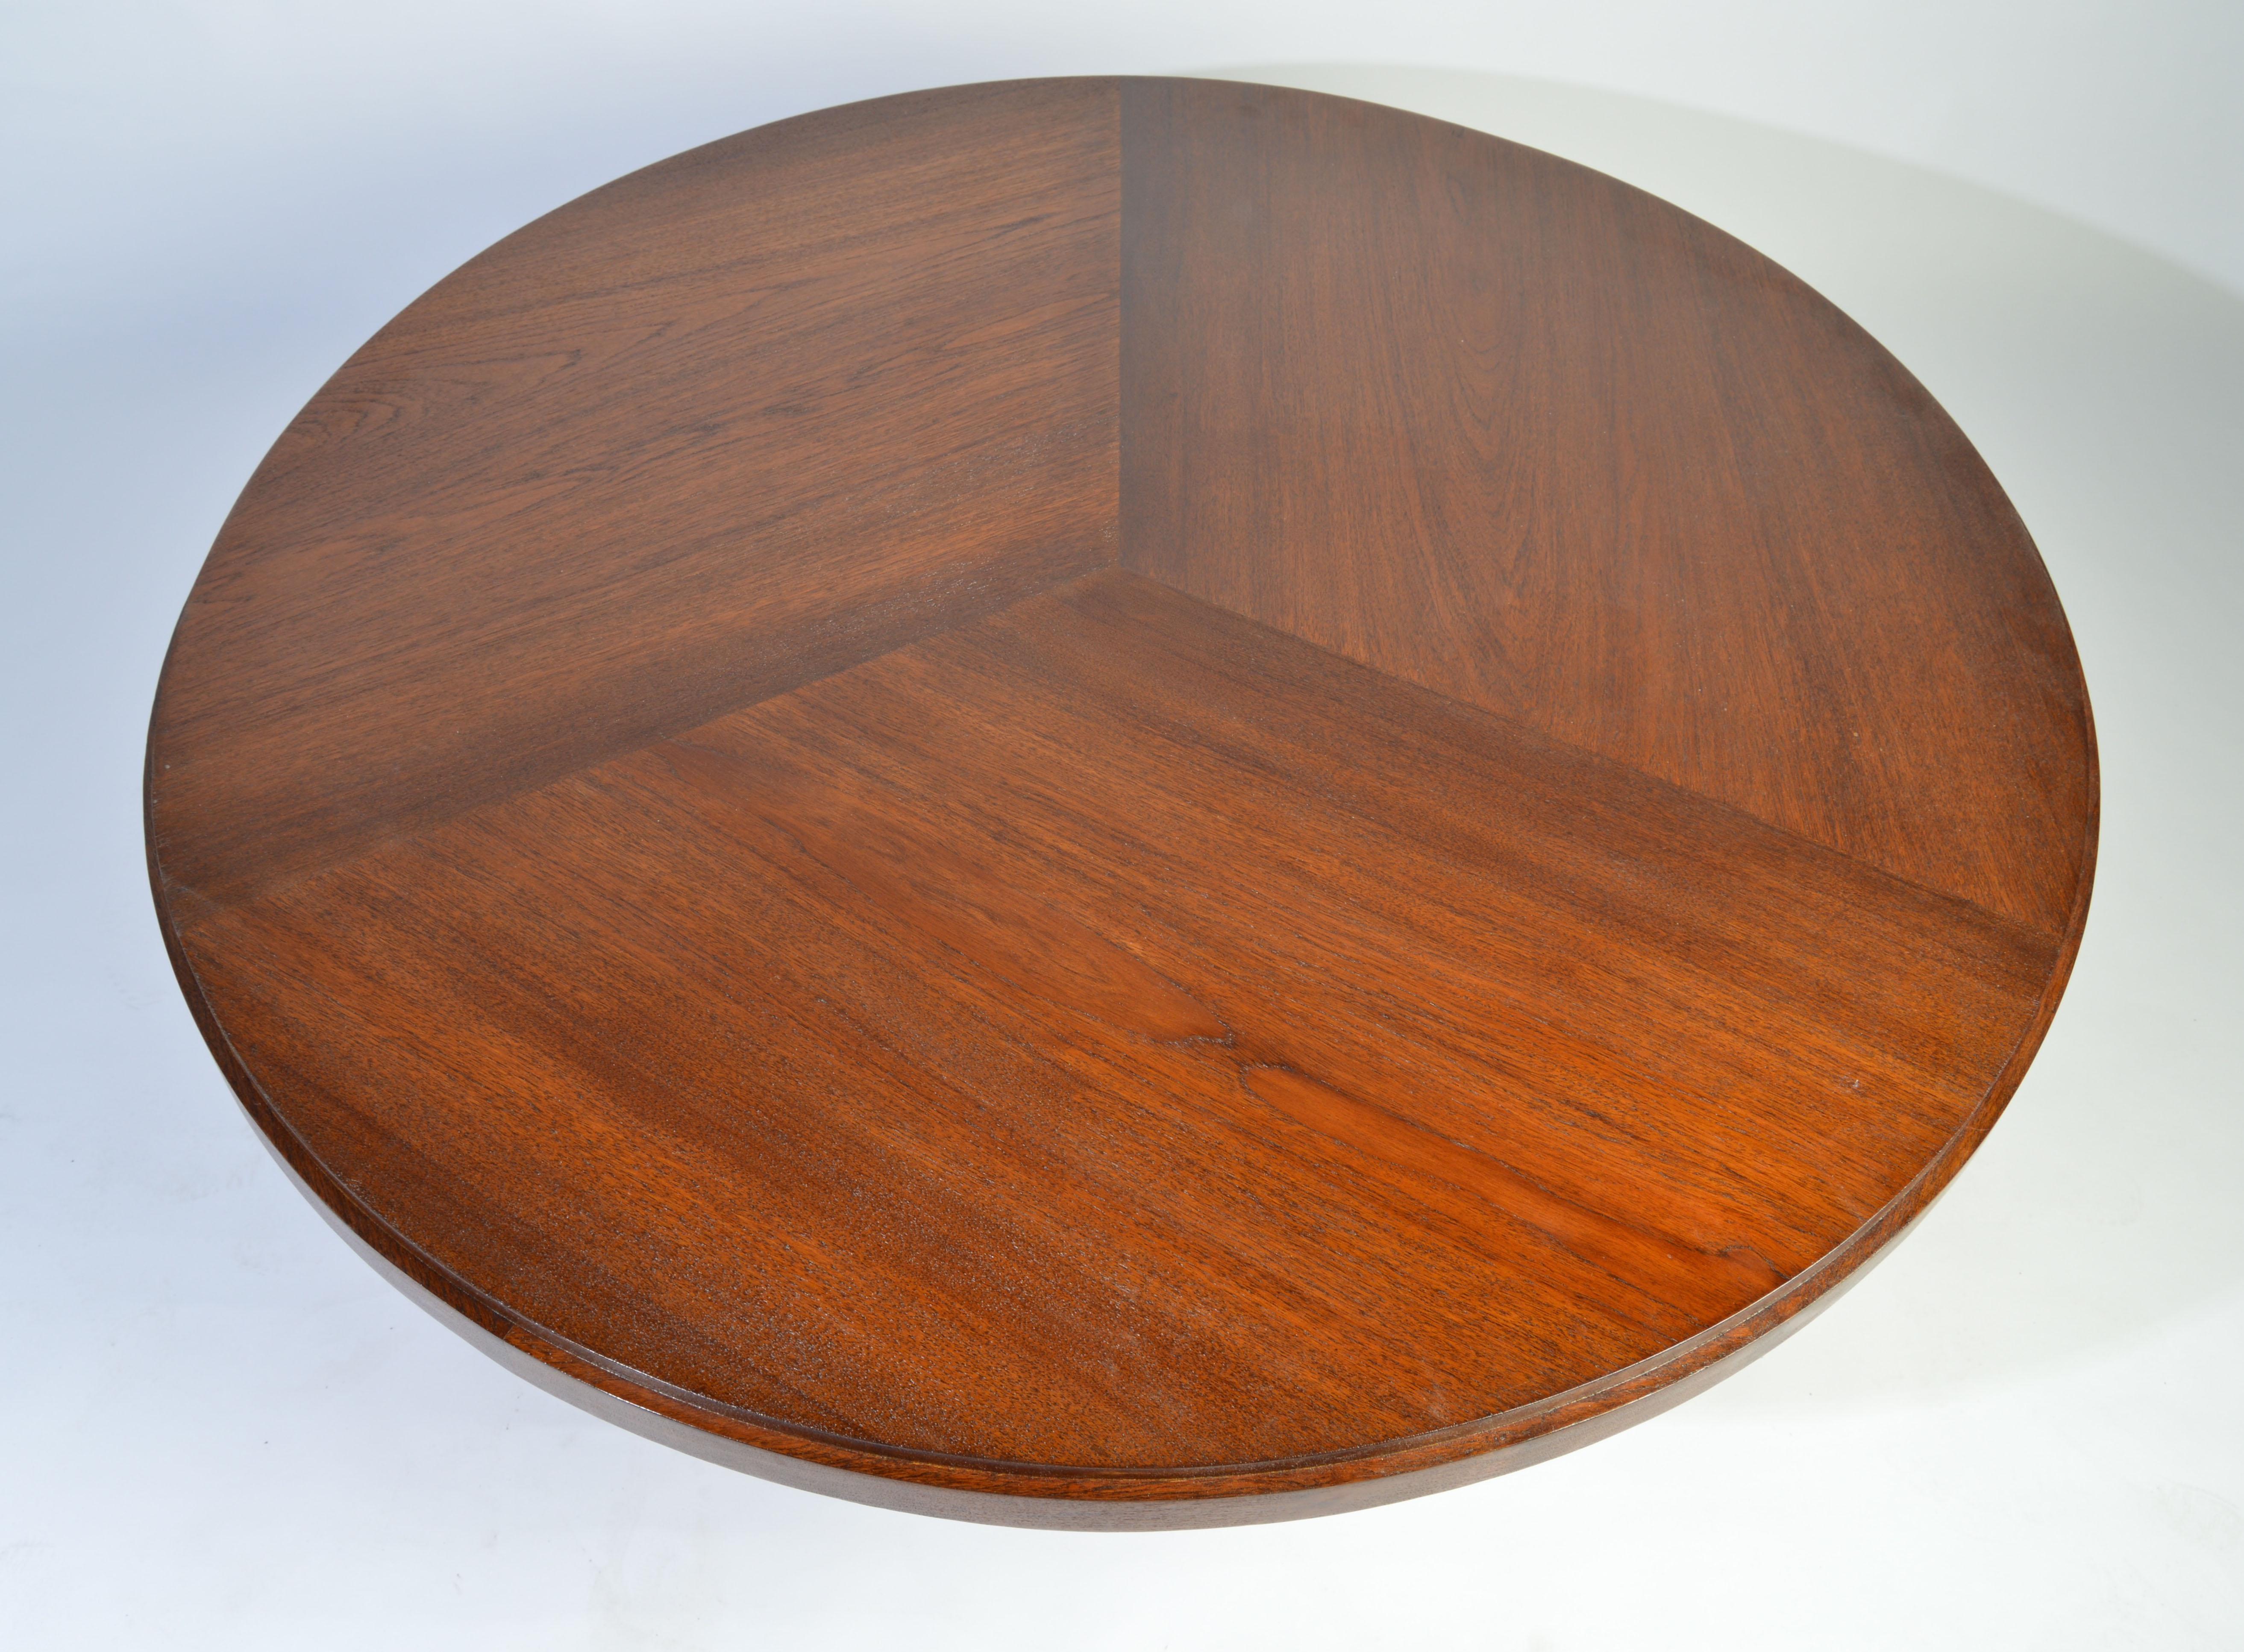 A monumental midcentury teak center table in the manner of Edward Wormley or Biedermeier. 
Excellent condition having a clean finish and sound structure.